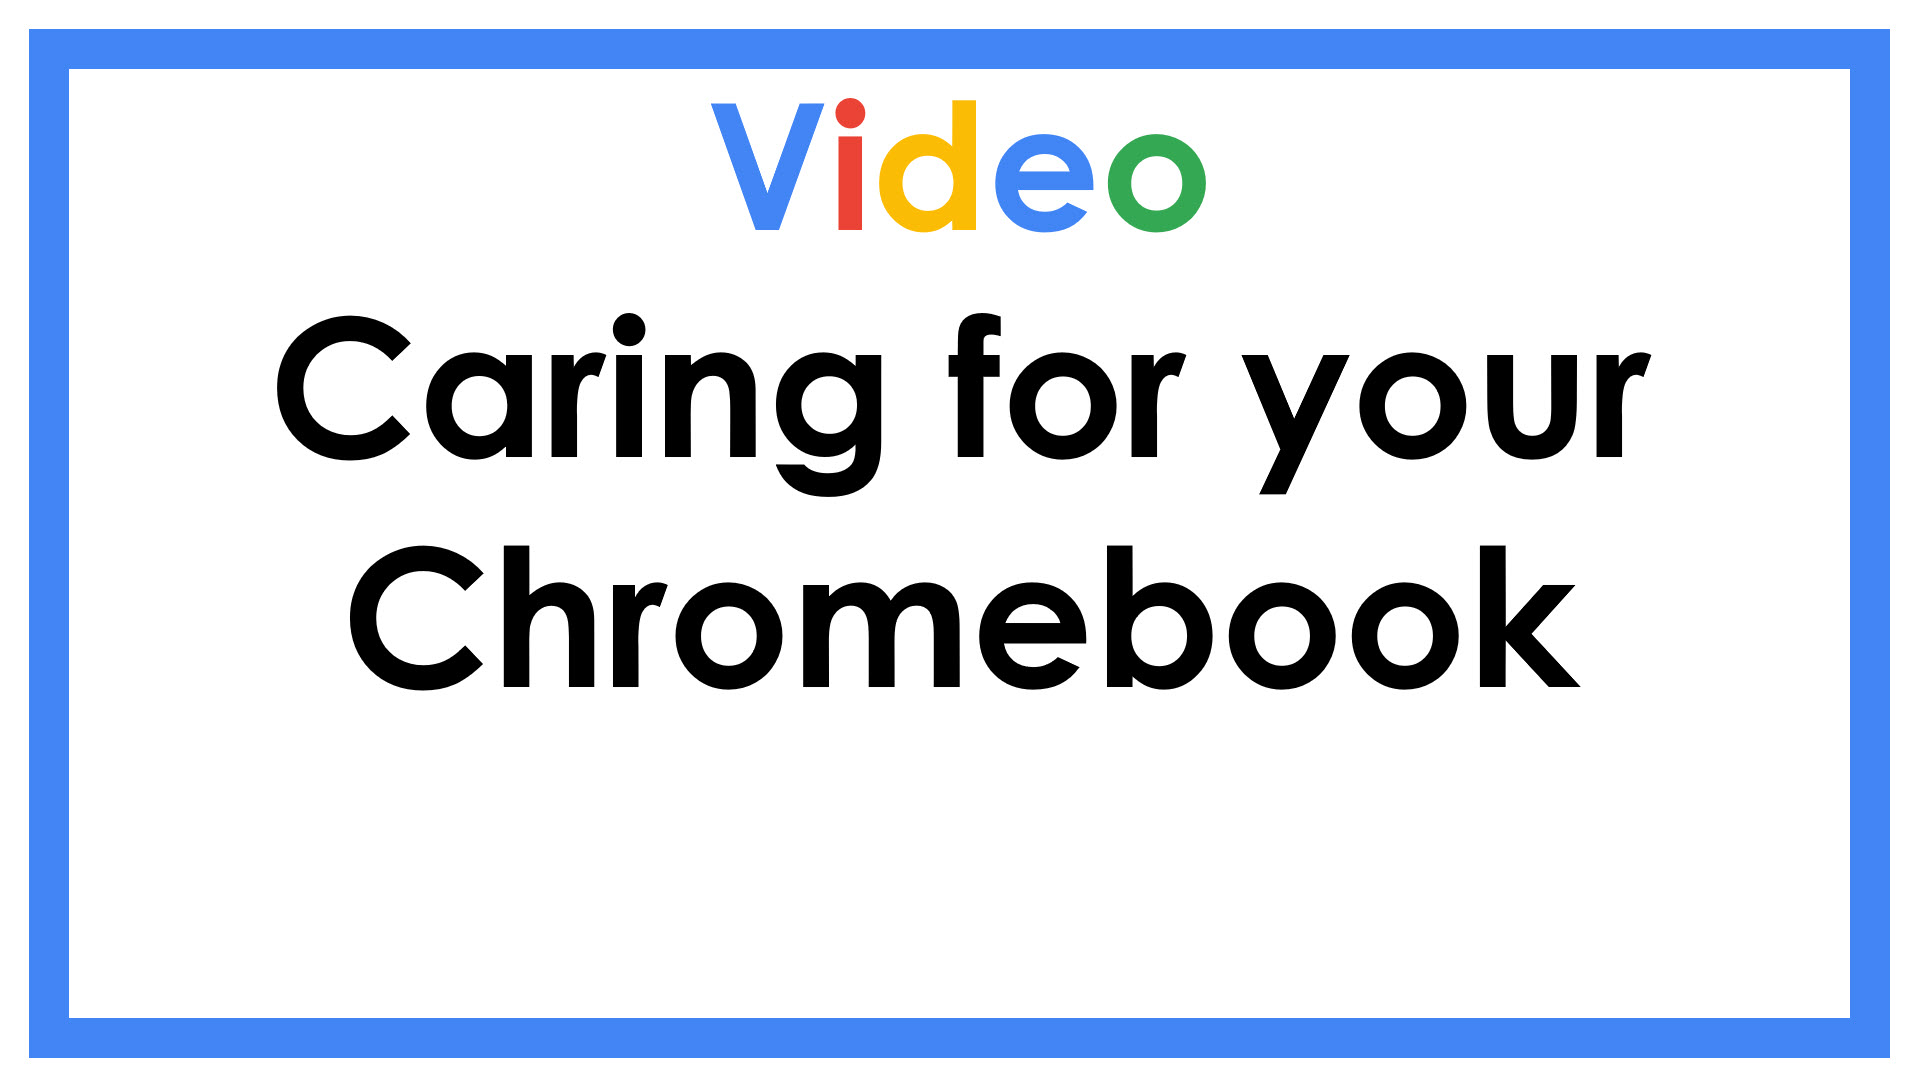 Video Caring for your Chromebook